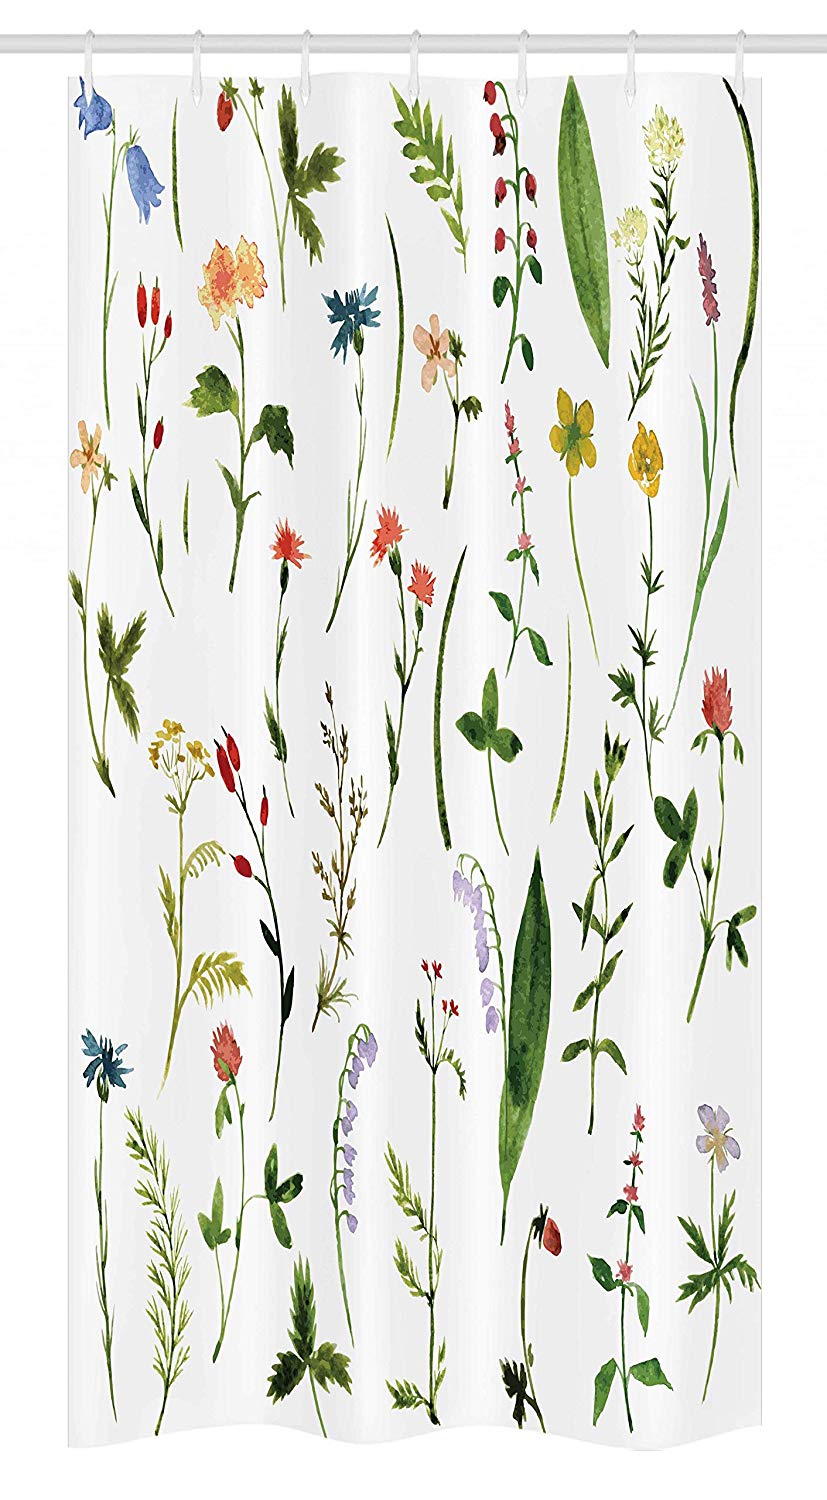 Ambesonne Watercolor Flower Stall Shower Curtain, Different Kinds of Flowers with Herbs Weeds Plants and Earth Elements, Fabric Bathroom Decor Set with Hooks, 36 W x 72 L Inches, Multicolor